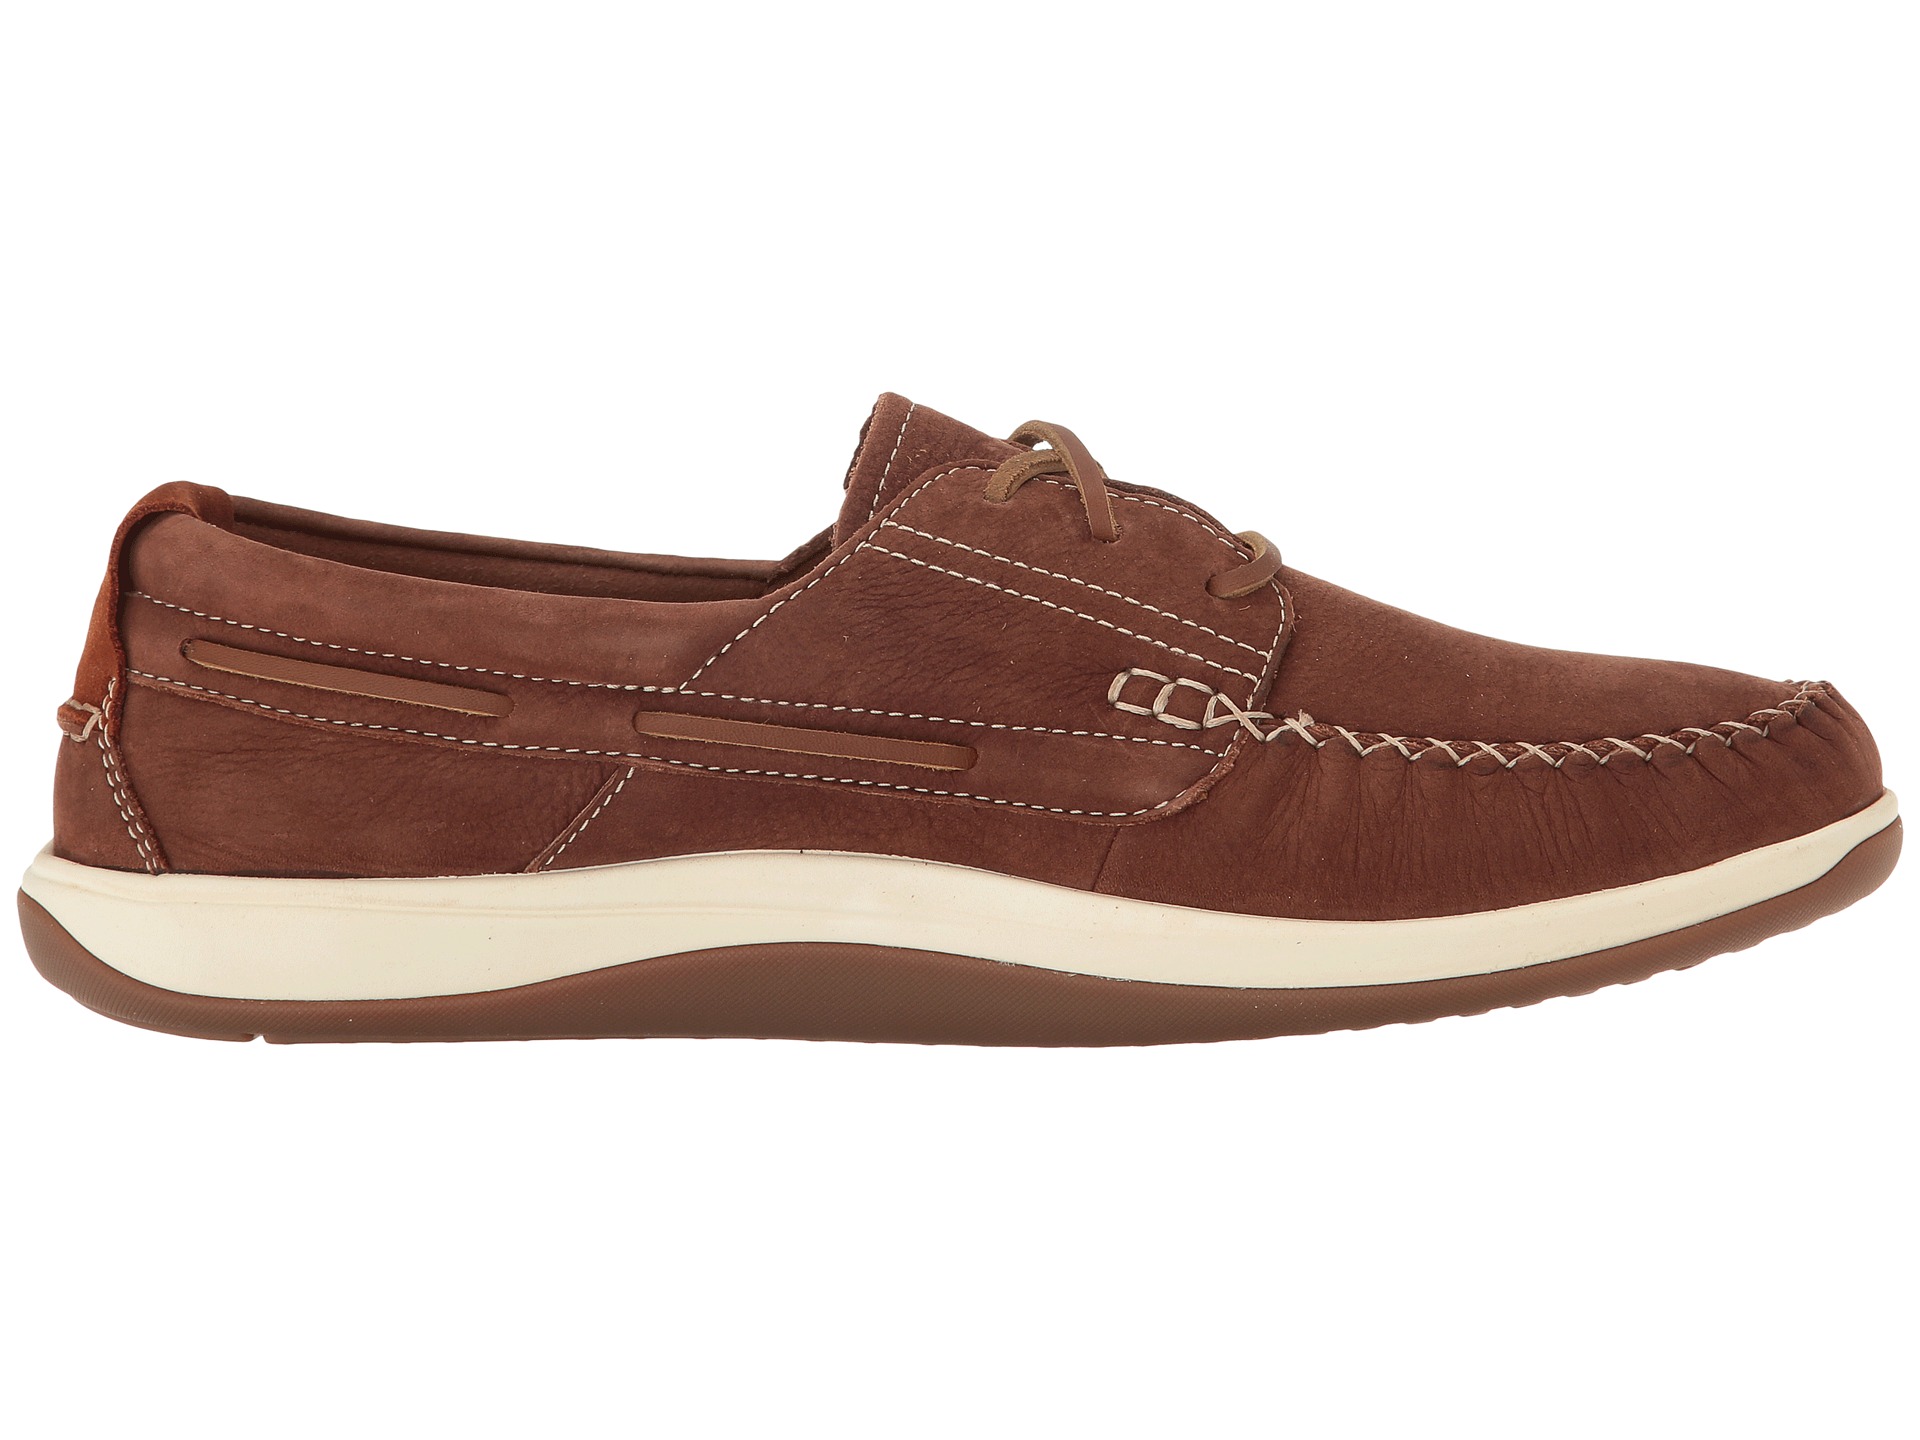 Cole Haan Boothbay Boat Shoe at Zappos.com